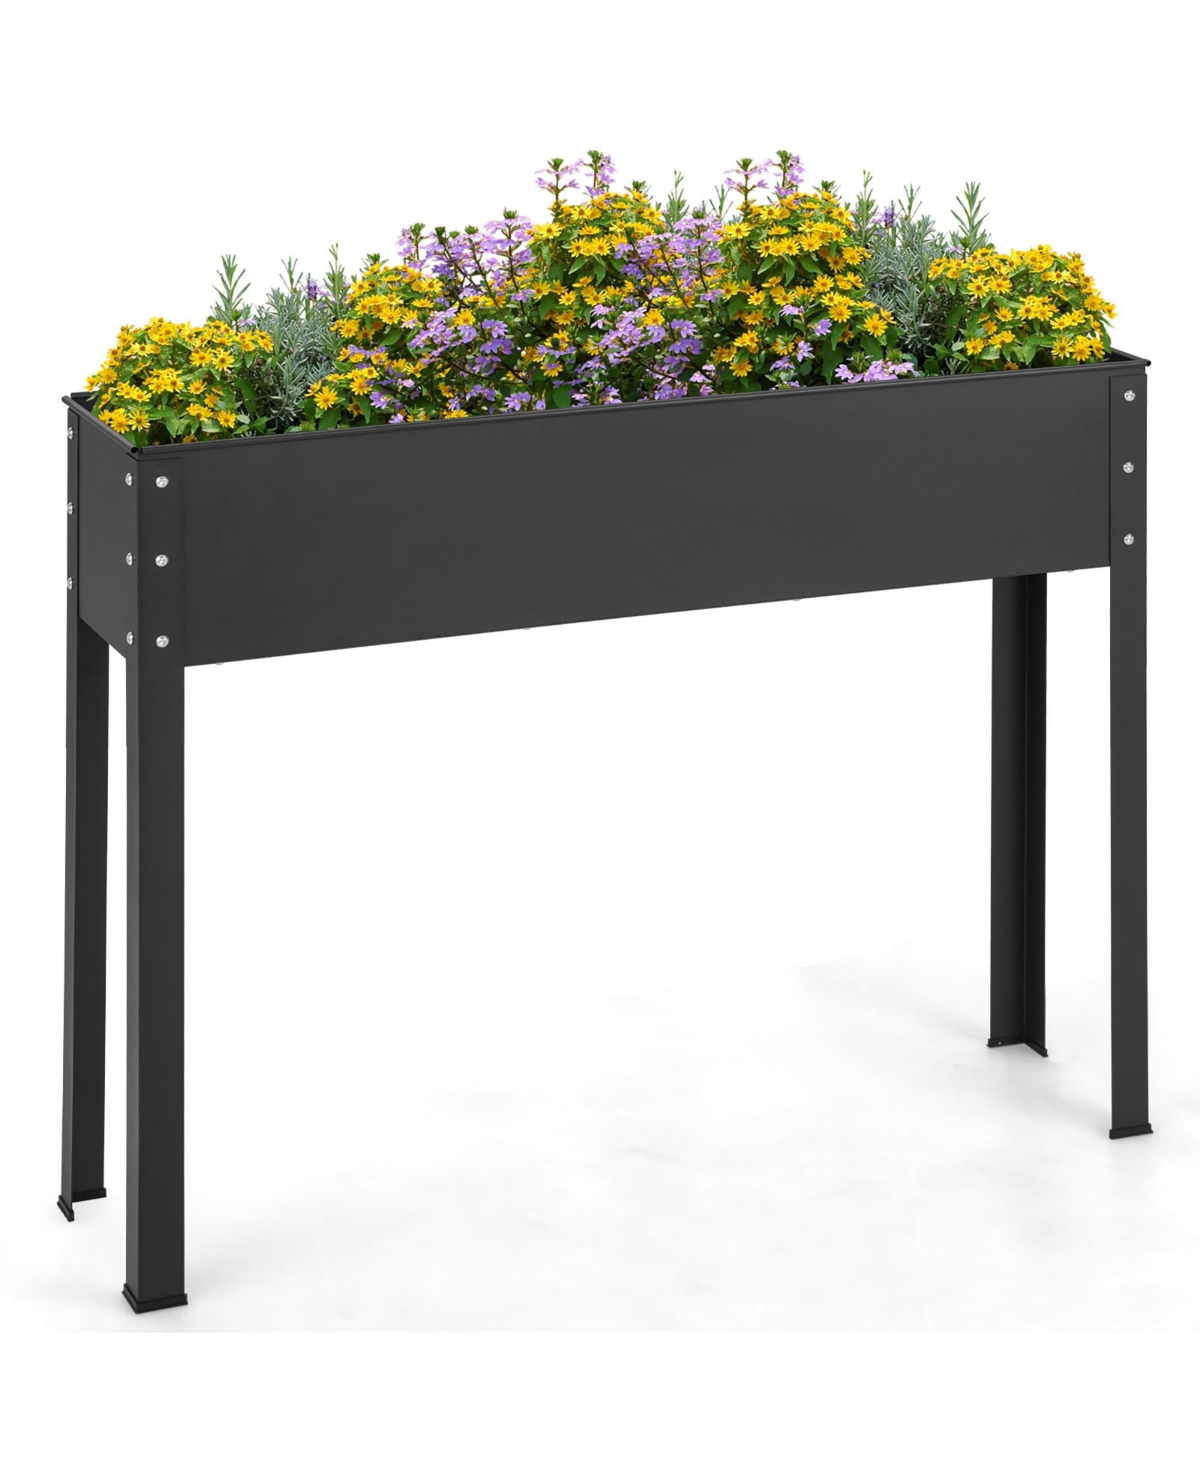 40" Raised Garden Bed with Legs Metal Elevated Planter Box Drainage Hole Backyard - Black